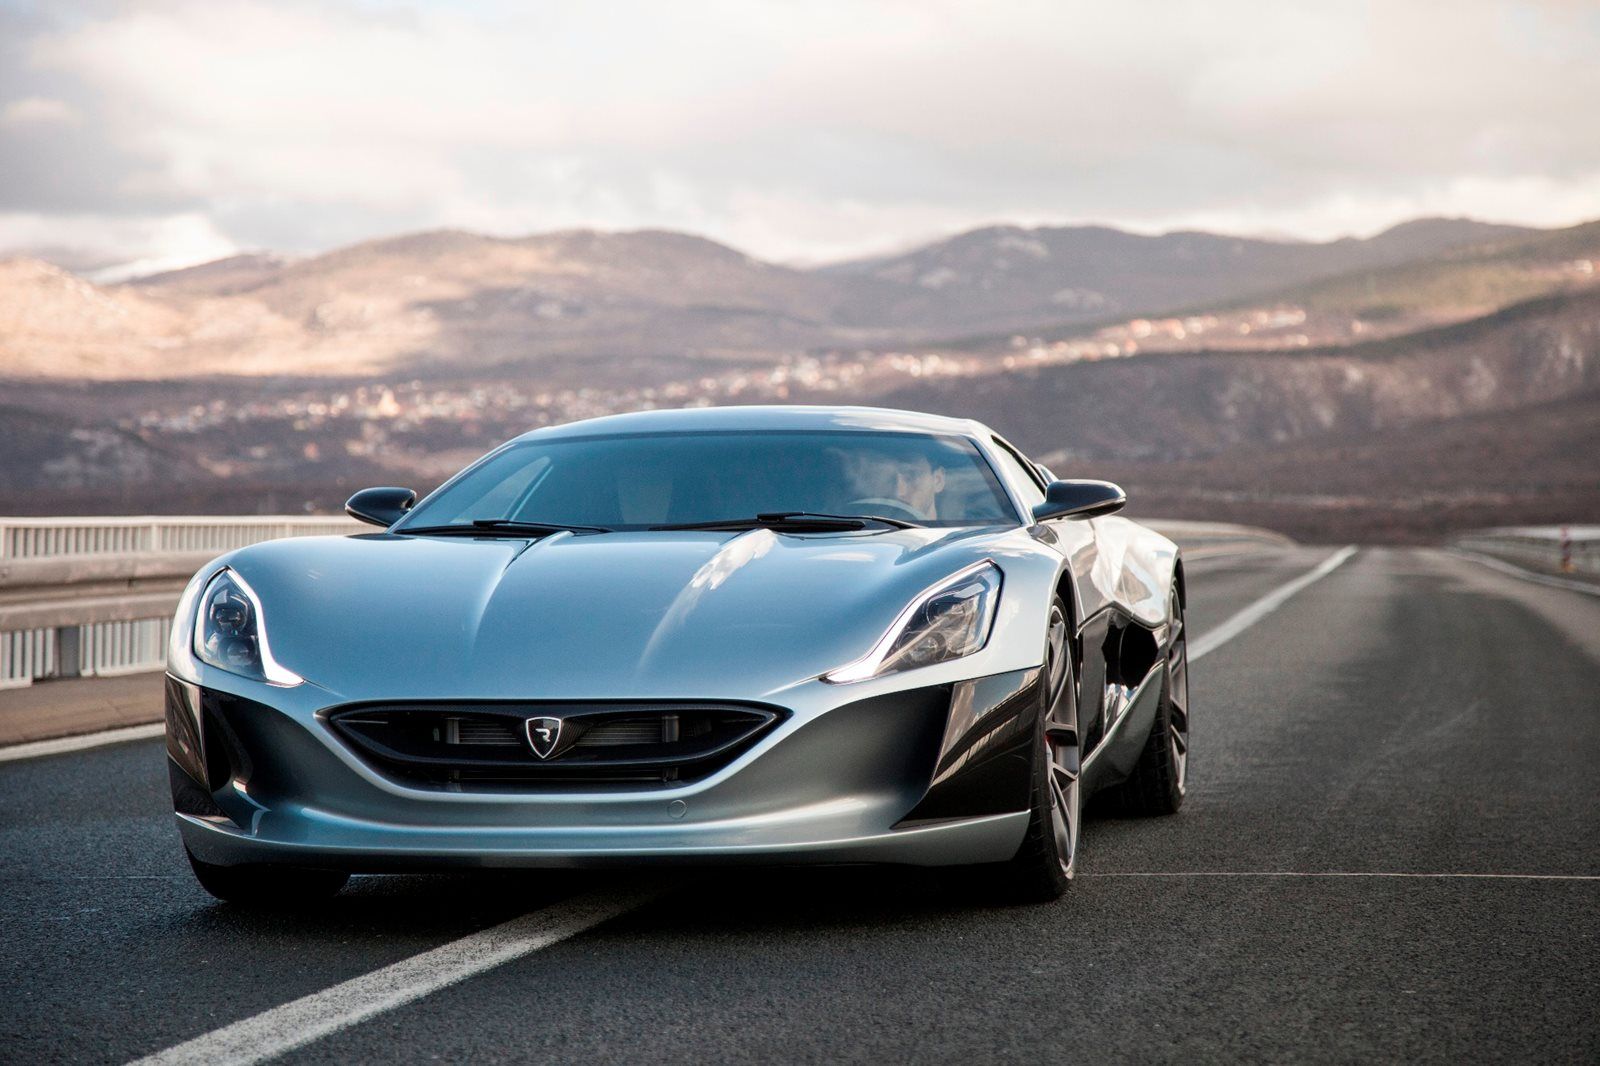 Rimac Concept One on the road